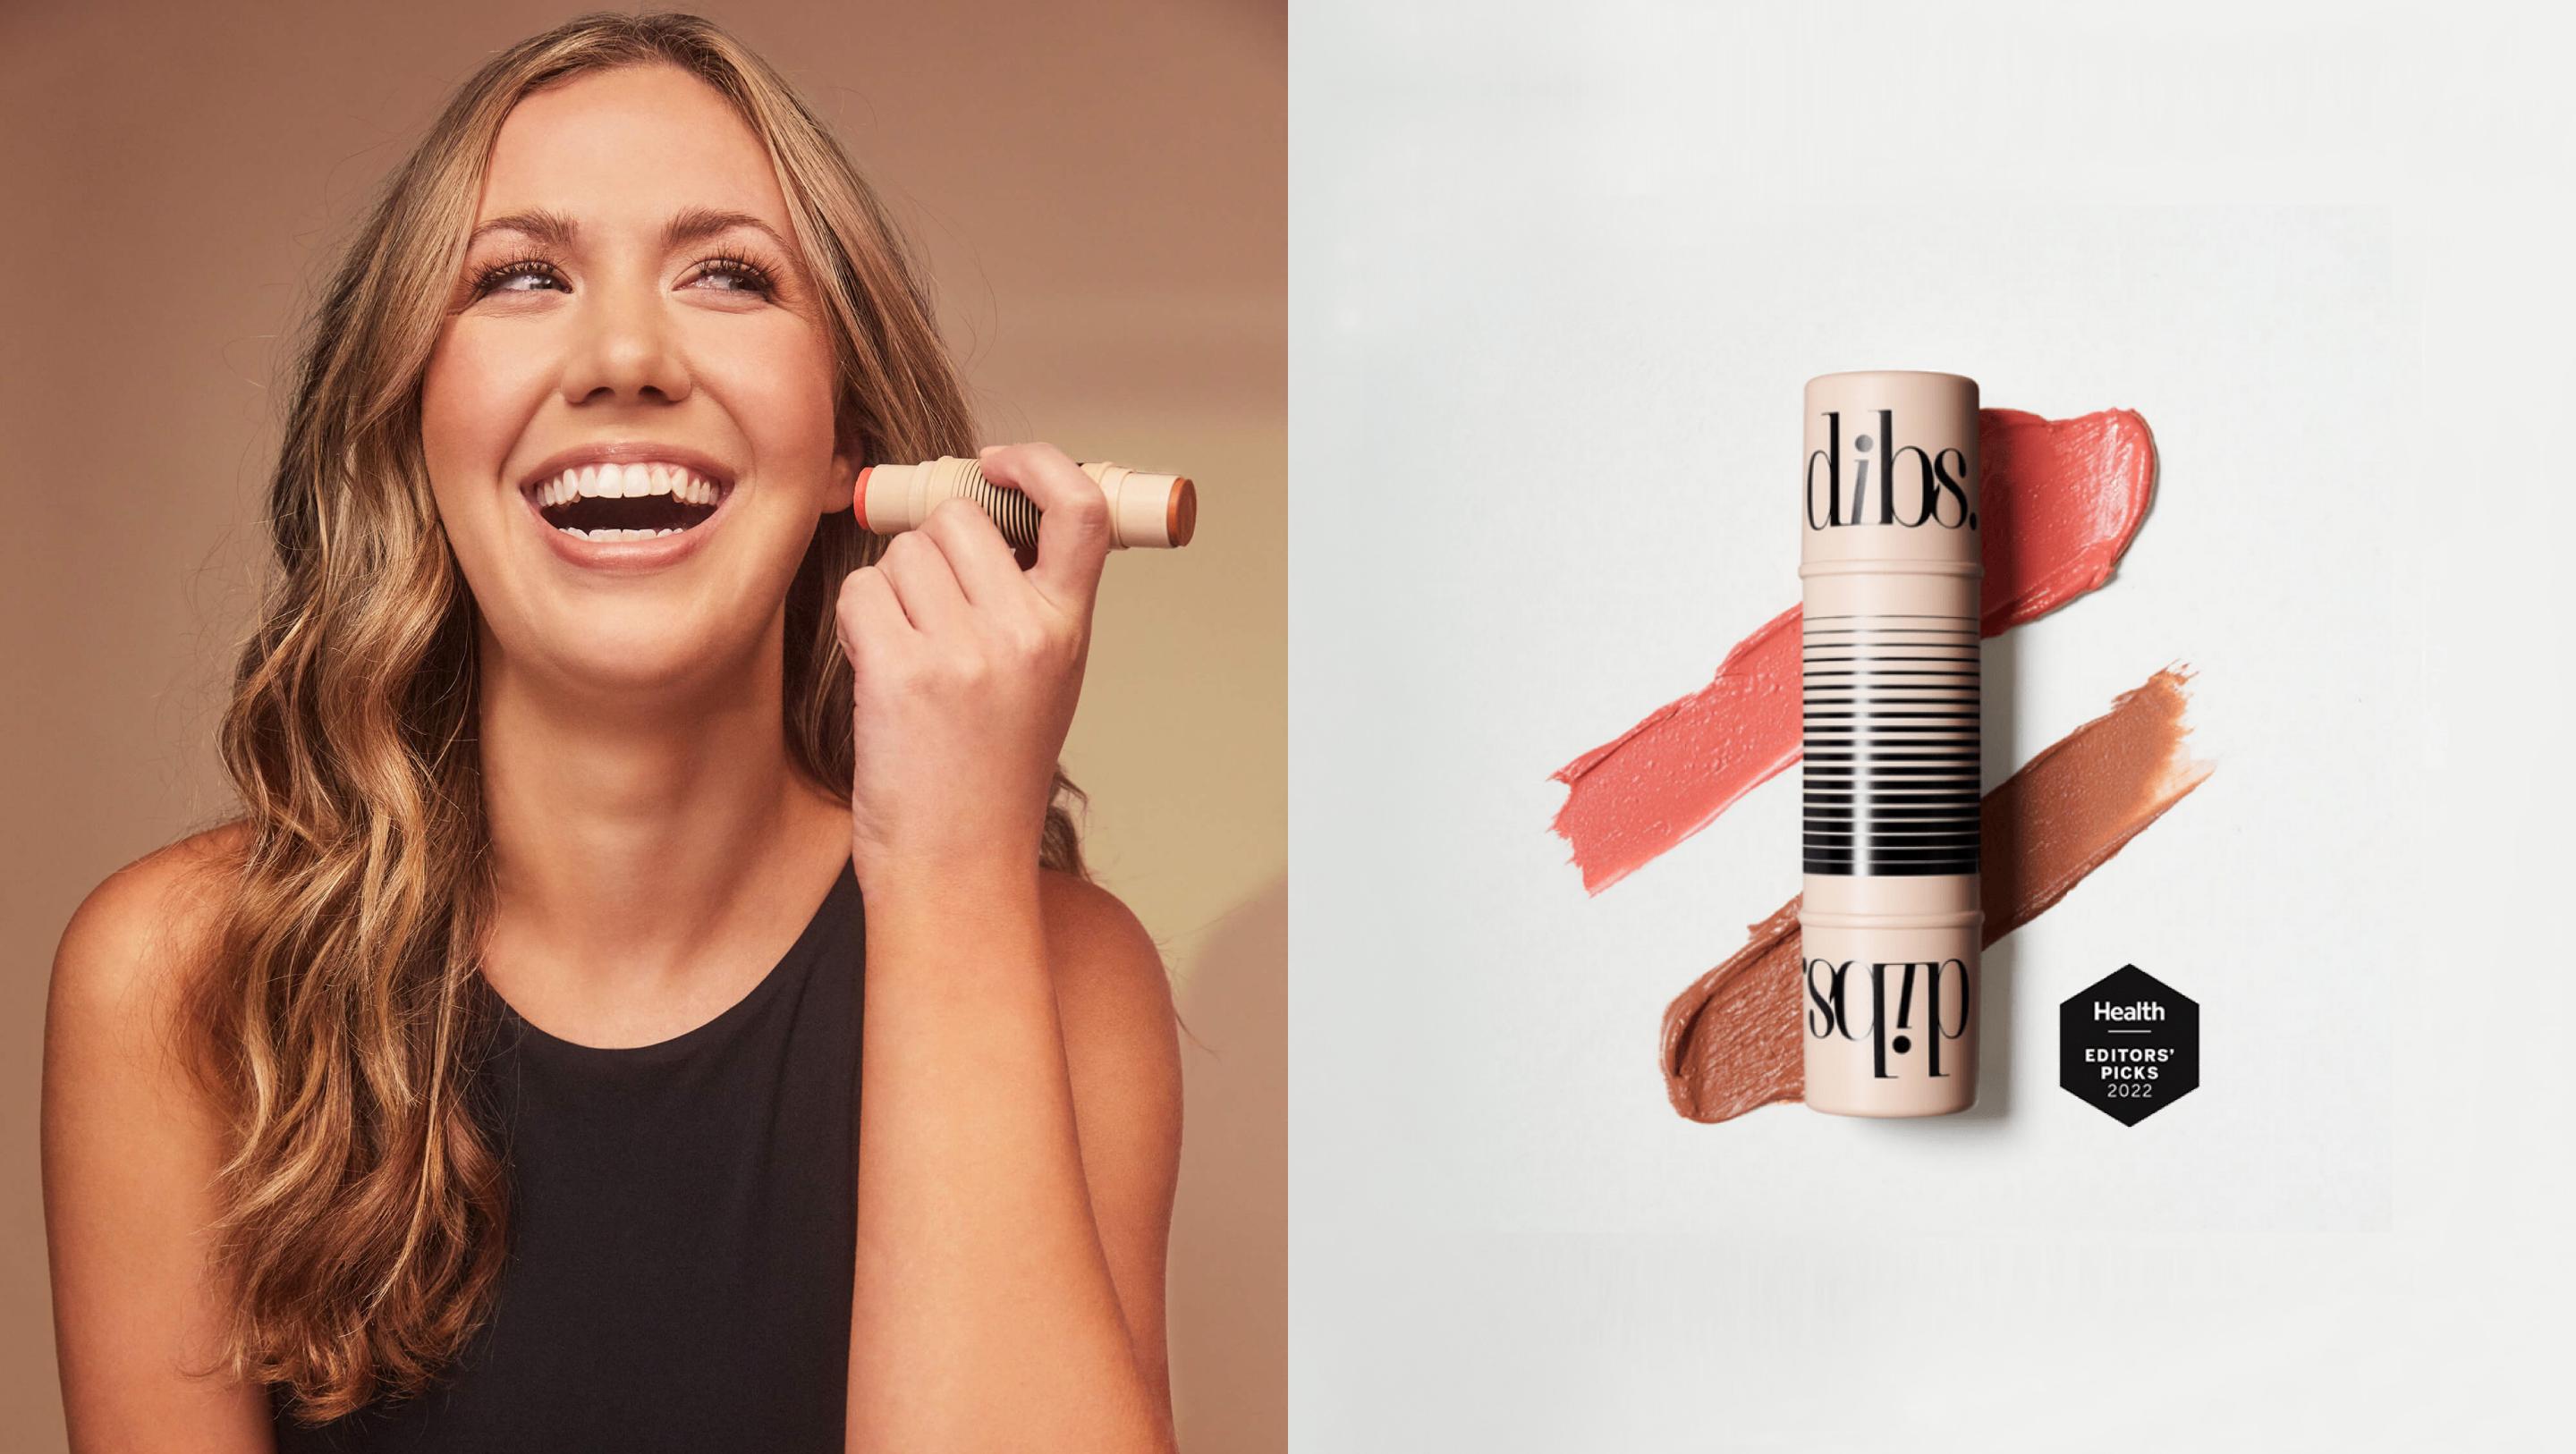 DIBS Beauty Product and Campaign Image